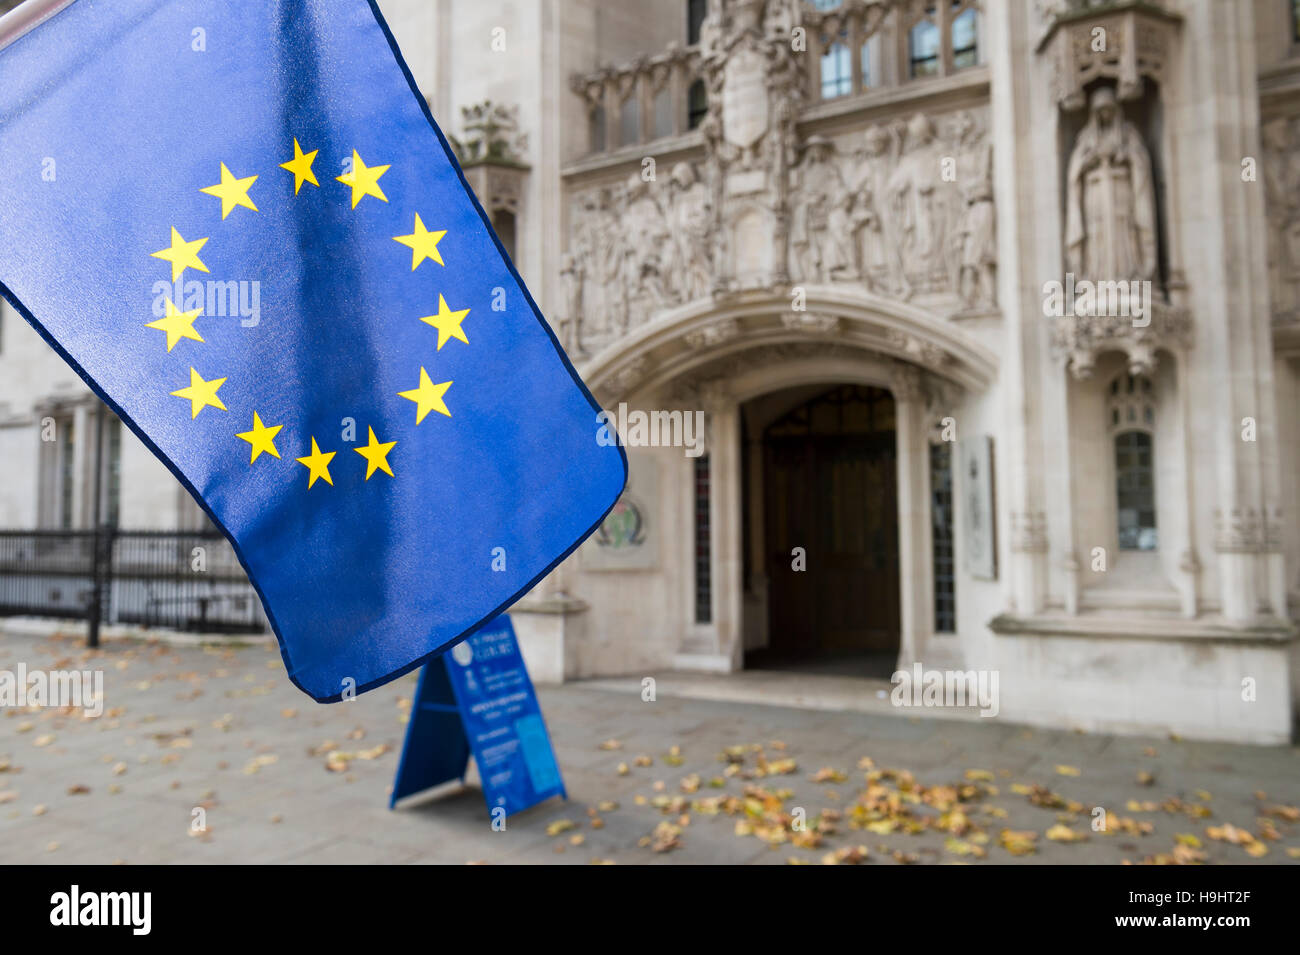 European Union flag flying in front of The Supreme Court of the United Kingdom in the public Middlesex Guildhall building Stock Photo